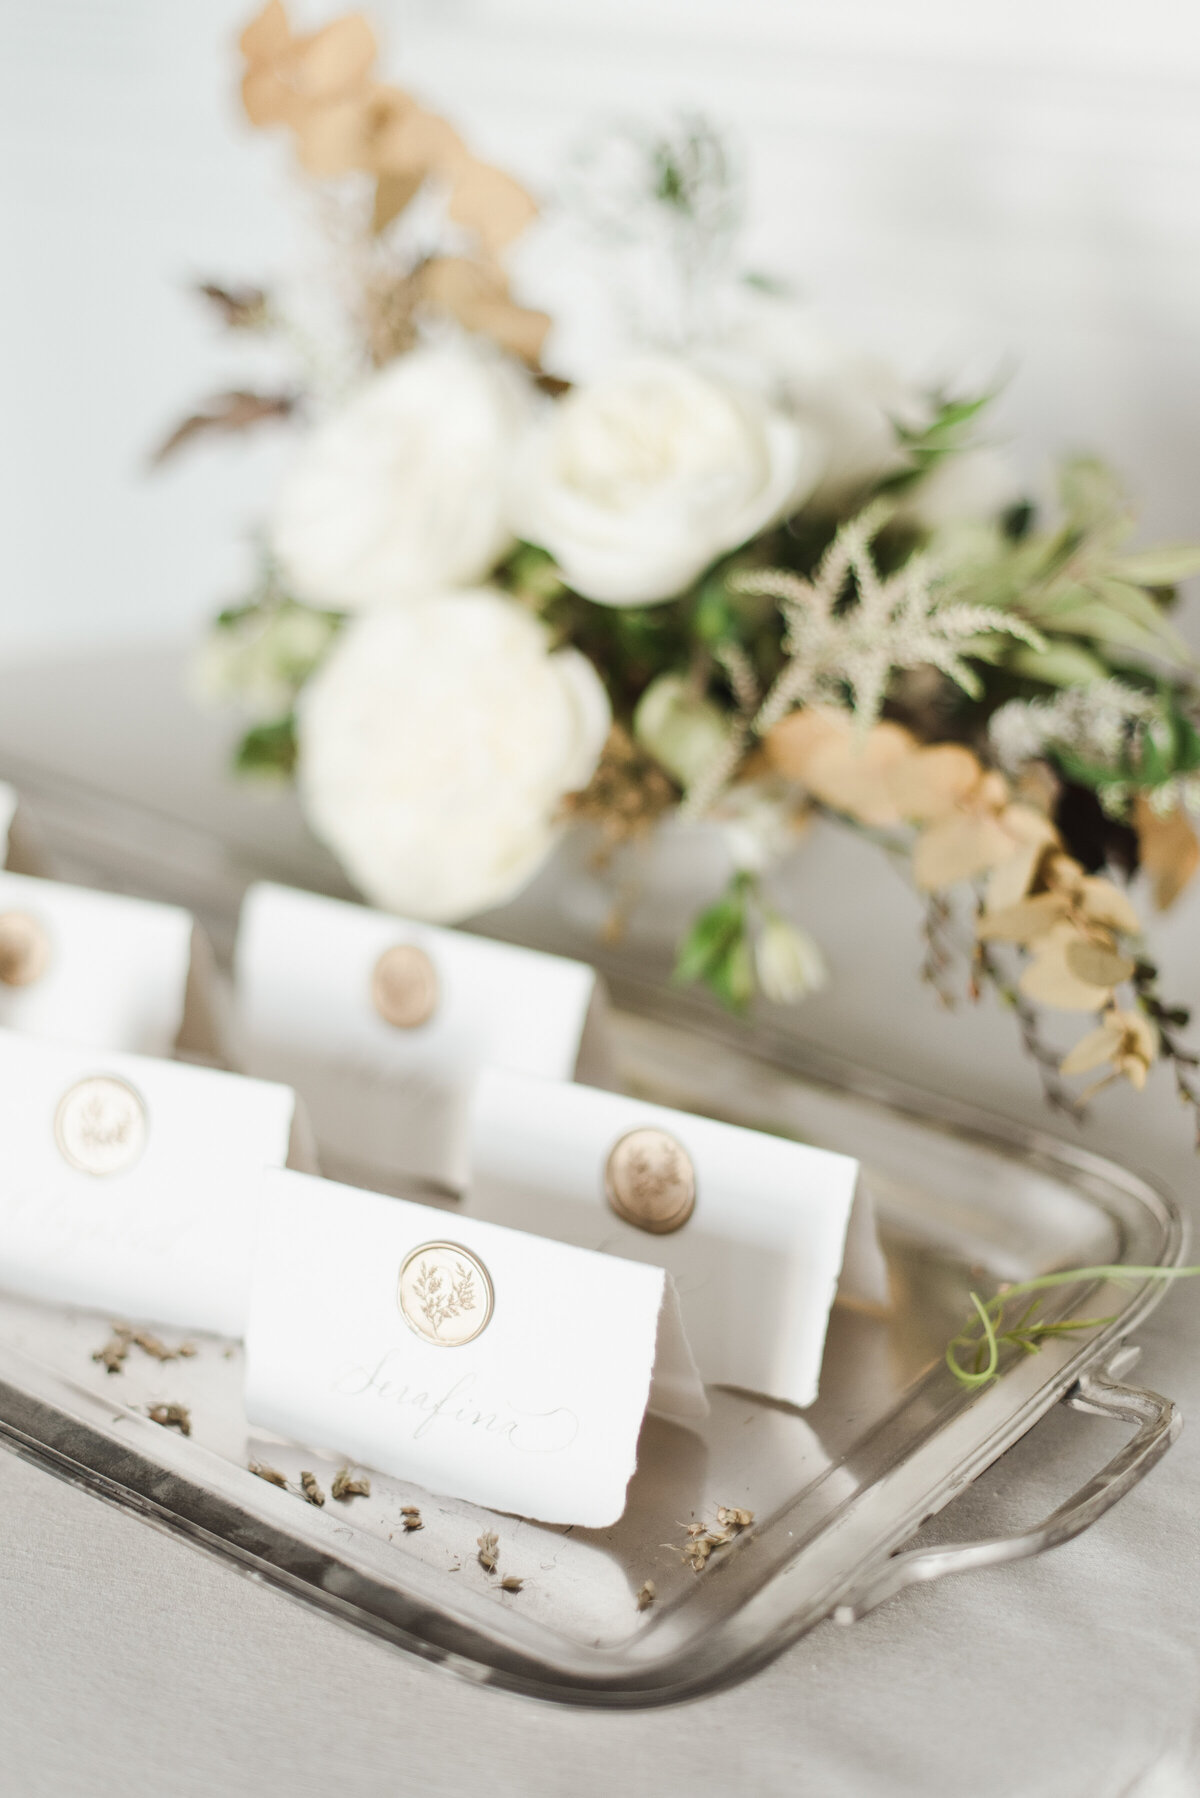 A close-up of a tray displaying tented white place cards made from handmade paper. Each card features delicately hand-calligraphed names and is sealed with a gold wax seal.